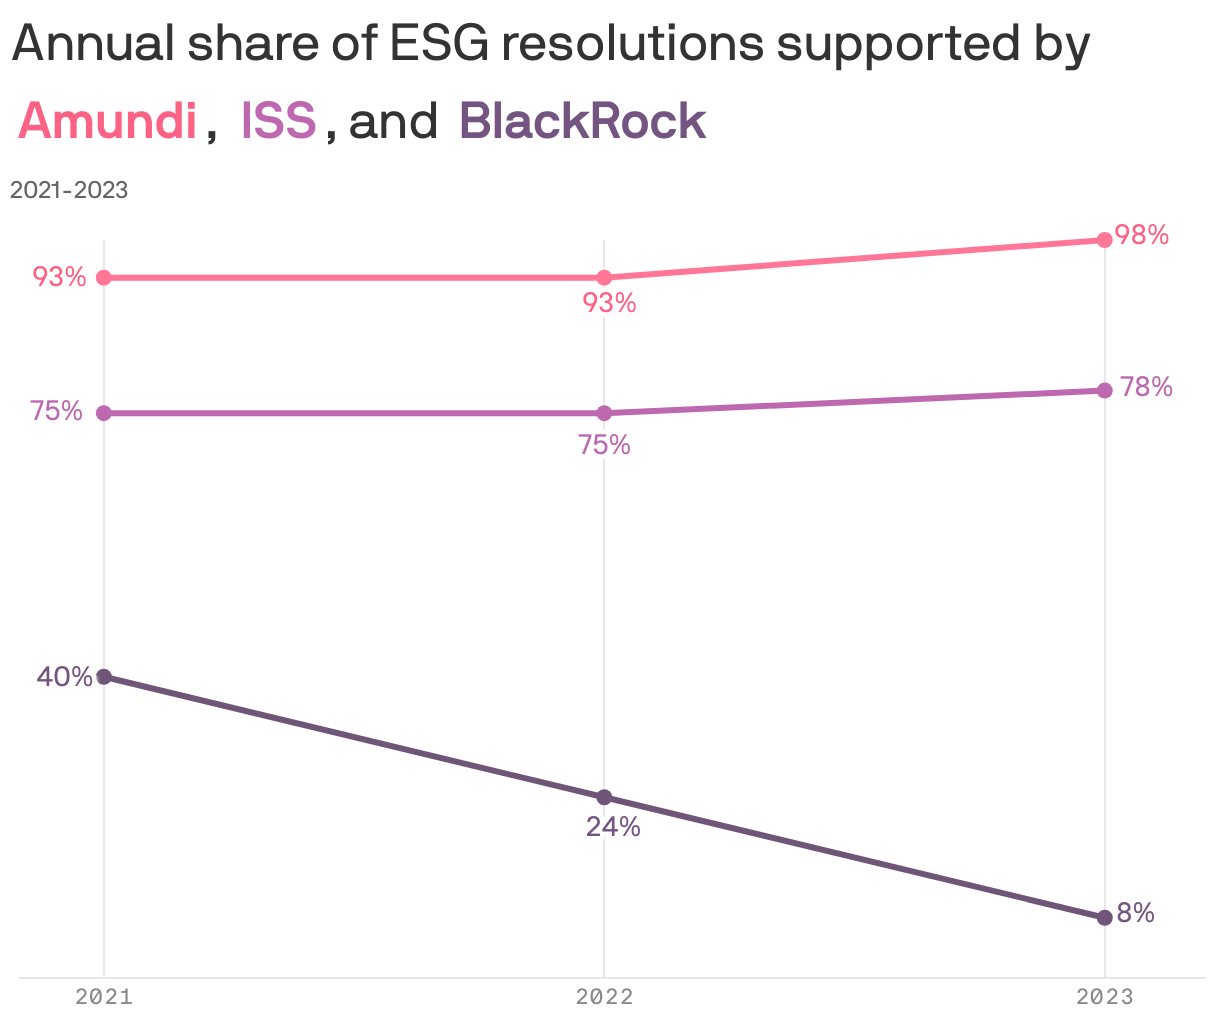 Annual share of ESG resolutions supported by  <span style="color: #fb6284; background-color:; padding: 0px 4px; display: inline-block; margin: 5px 0px 0px; white-space: nowrap; font-weight: 900;">Amundi</span>, <span style="color: #bd68af; background-color:; padding: 0px 4px; display: inline-block; margin: 5px 0px 0px; white-space: nowrap; font-weight: 900;">ISS</span> and <span style="color: #745480; background-color:; padding: 0px 4px; display: inline-block; margin: 5px 0px 0px; white-space: nowrap; font-weight: 900;">Blackrock</span>